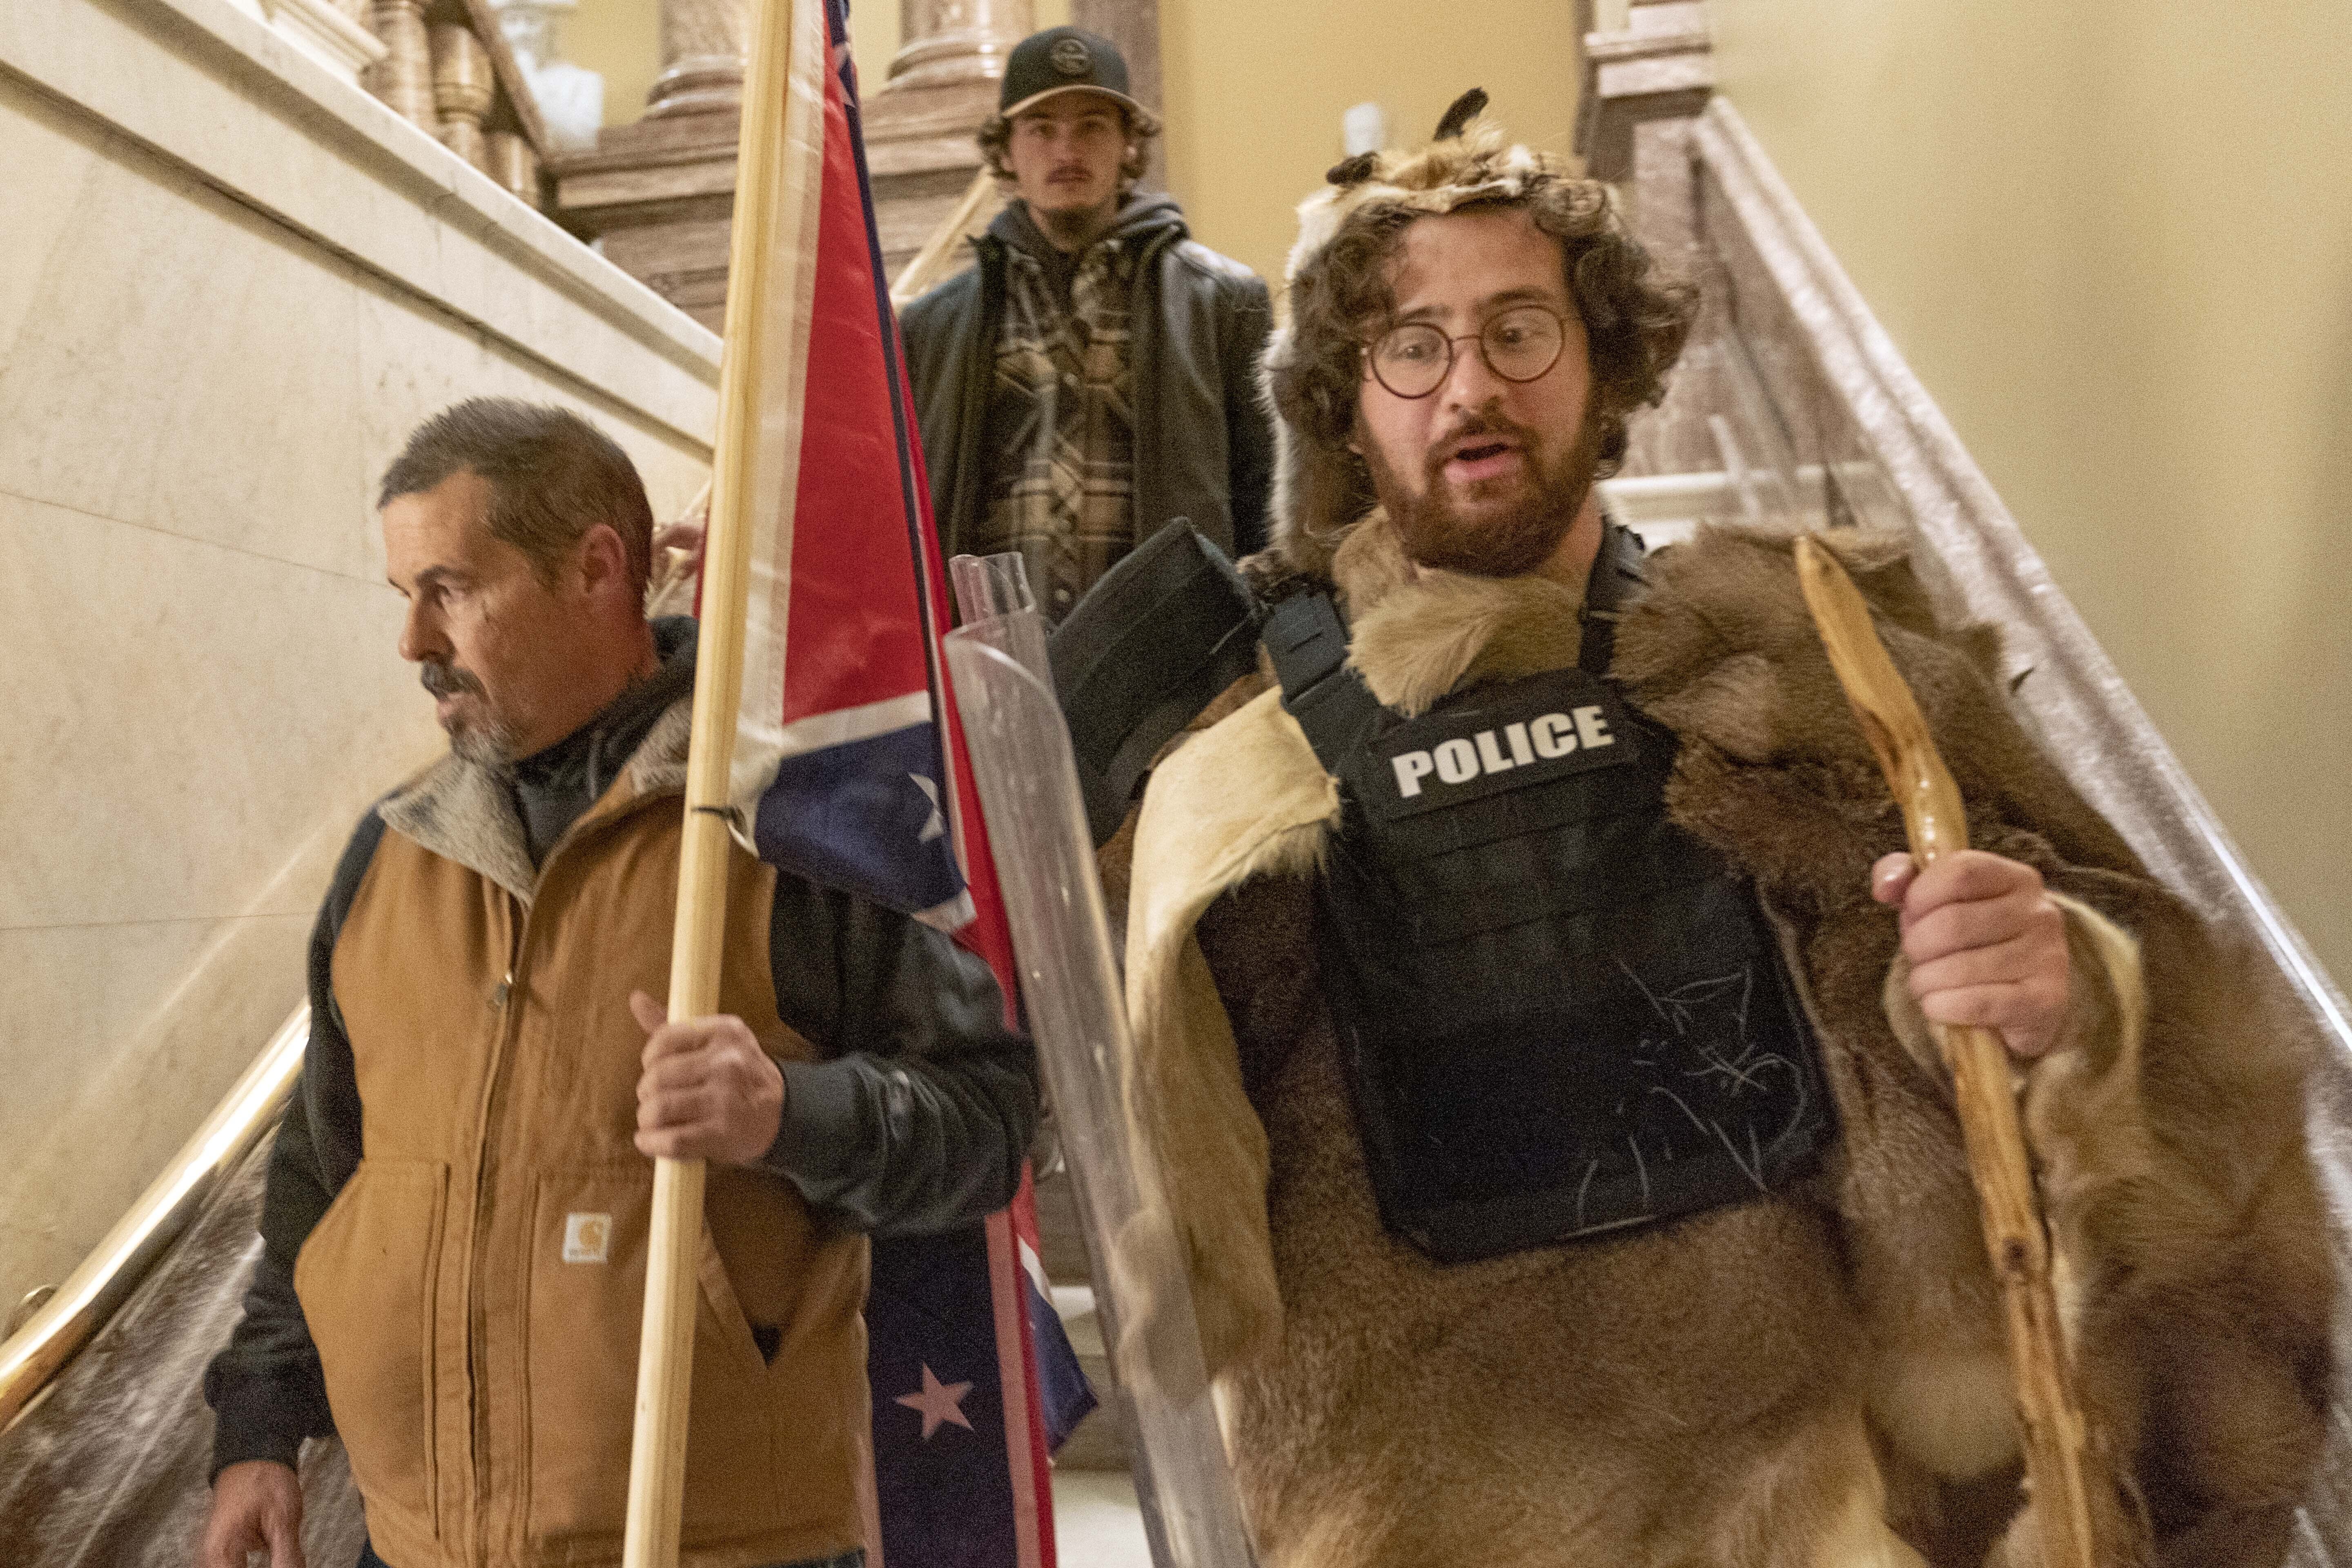 Aaron Mostofsky, who dressed as caveman in Jan. 6 riot, pleads responsible